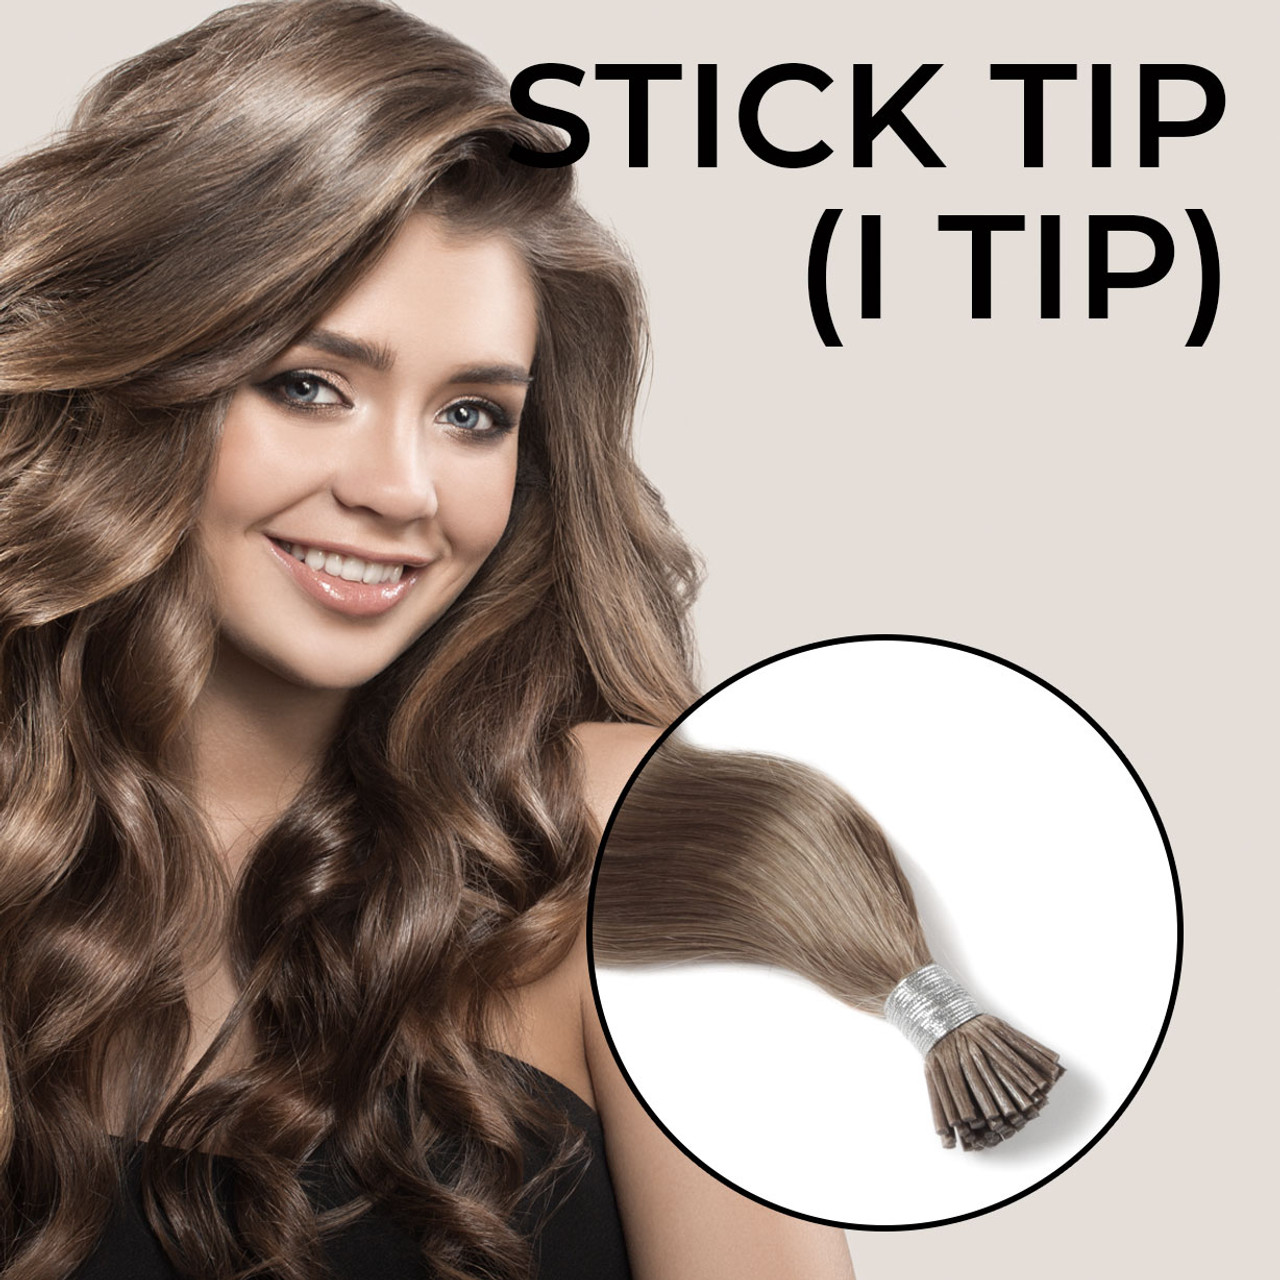 What Is A Stick Tip/I-Tip/Micro Ring Hair Extension?